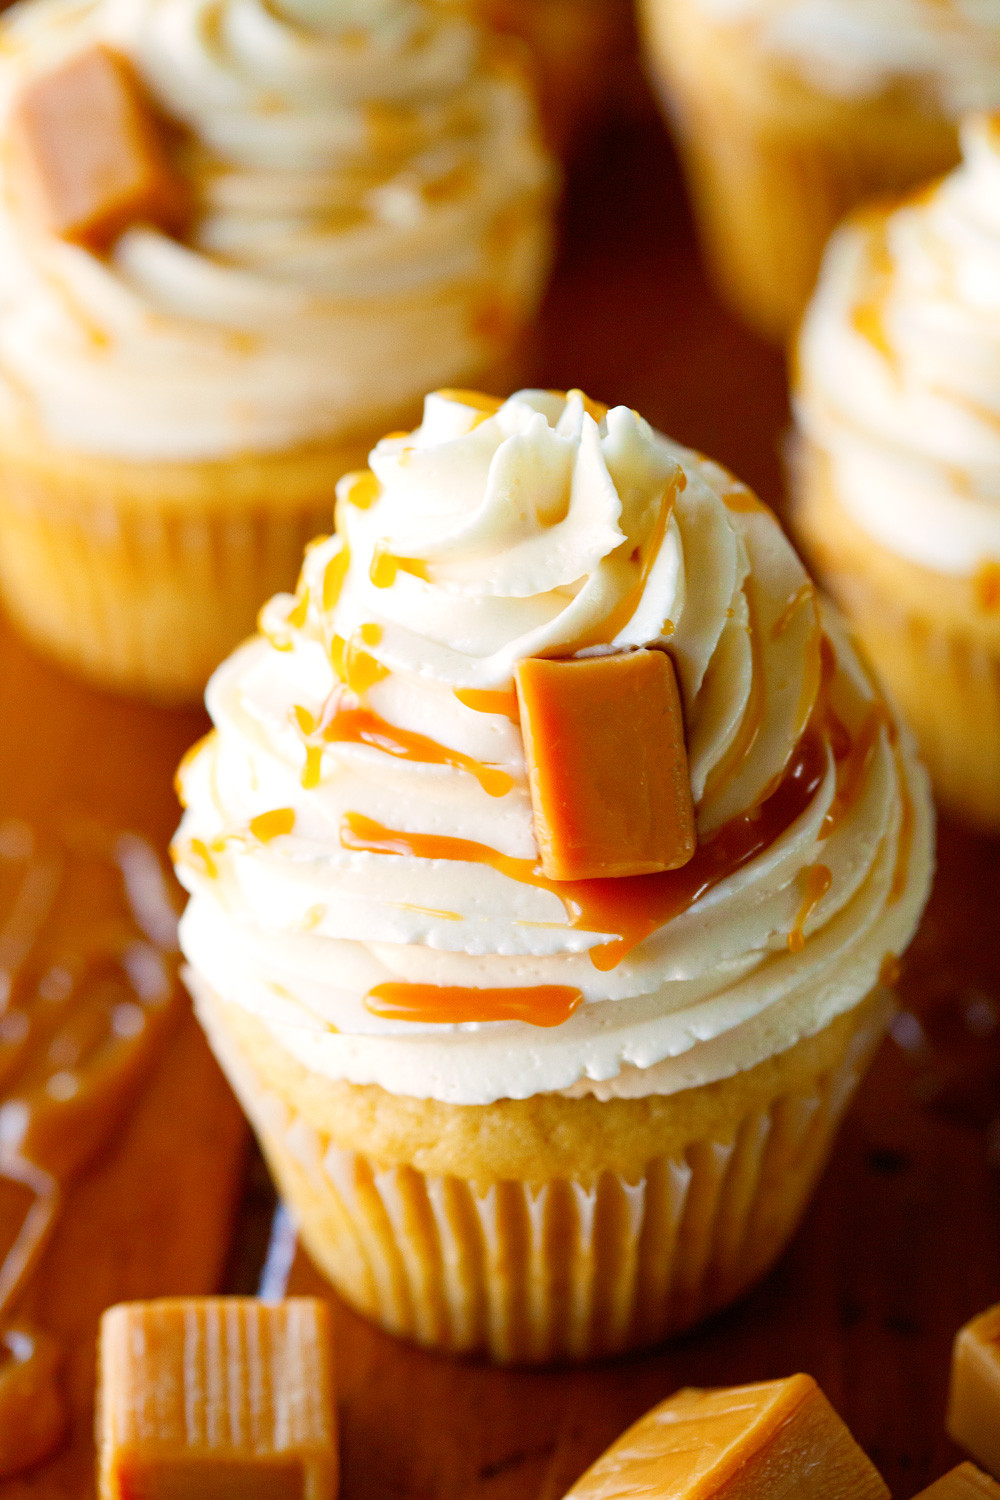 Best Cupcakes Recipe
 The Best Salted Caramel Cupcakes